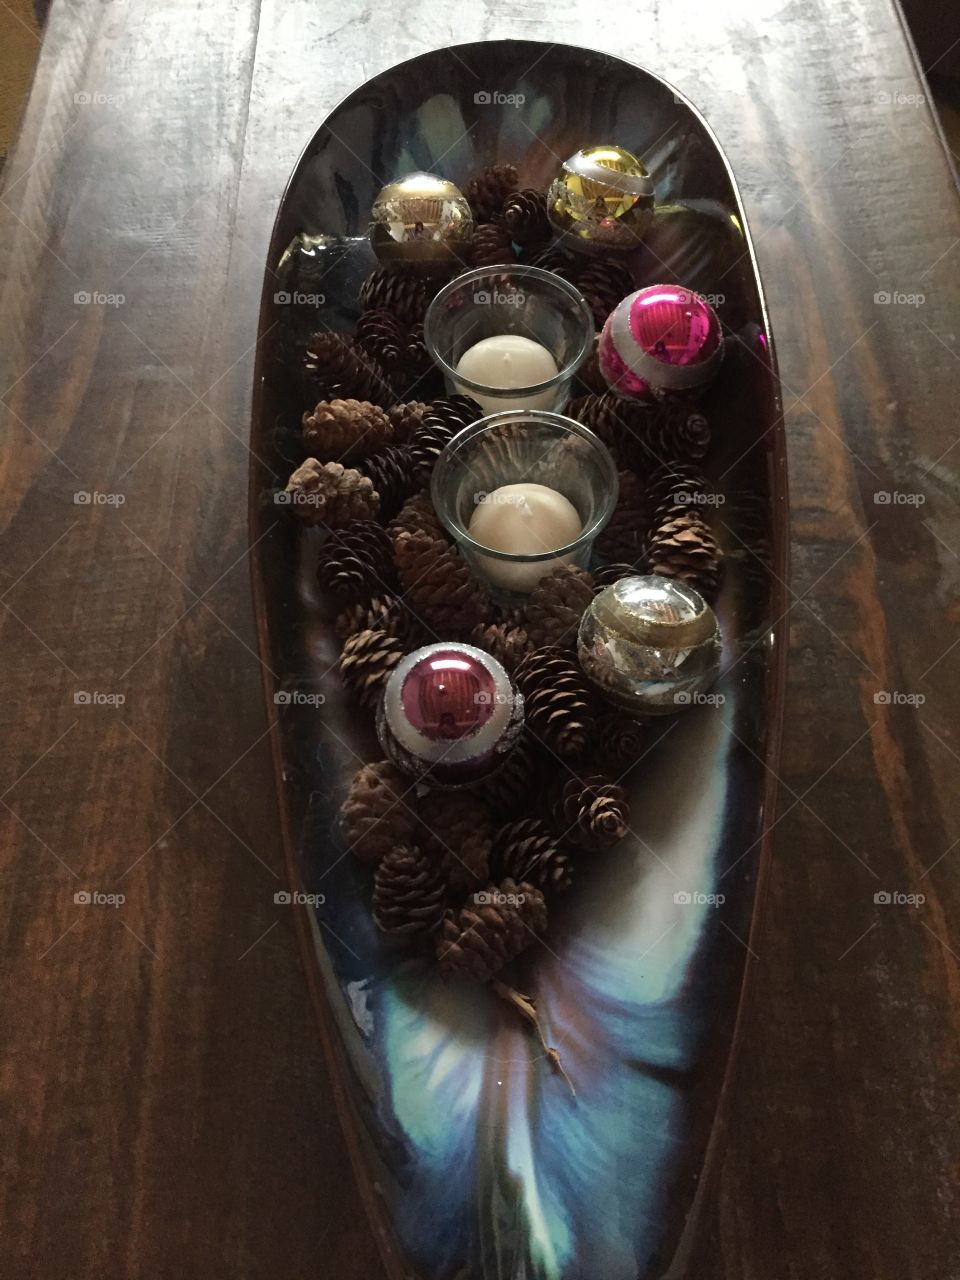 Decorating for the holiday season can be made simple and inexpensive a decorative dish bring in a little bit a nature add a couple do you lights and some glittery balls makes a beautiful centrepiece